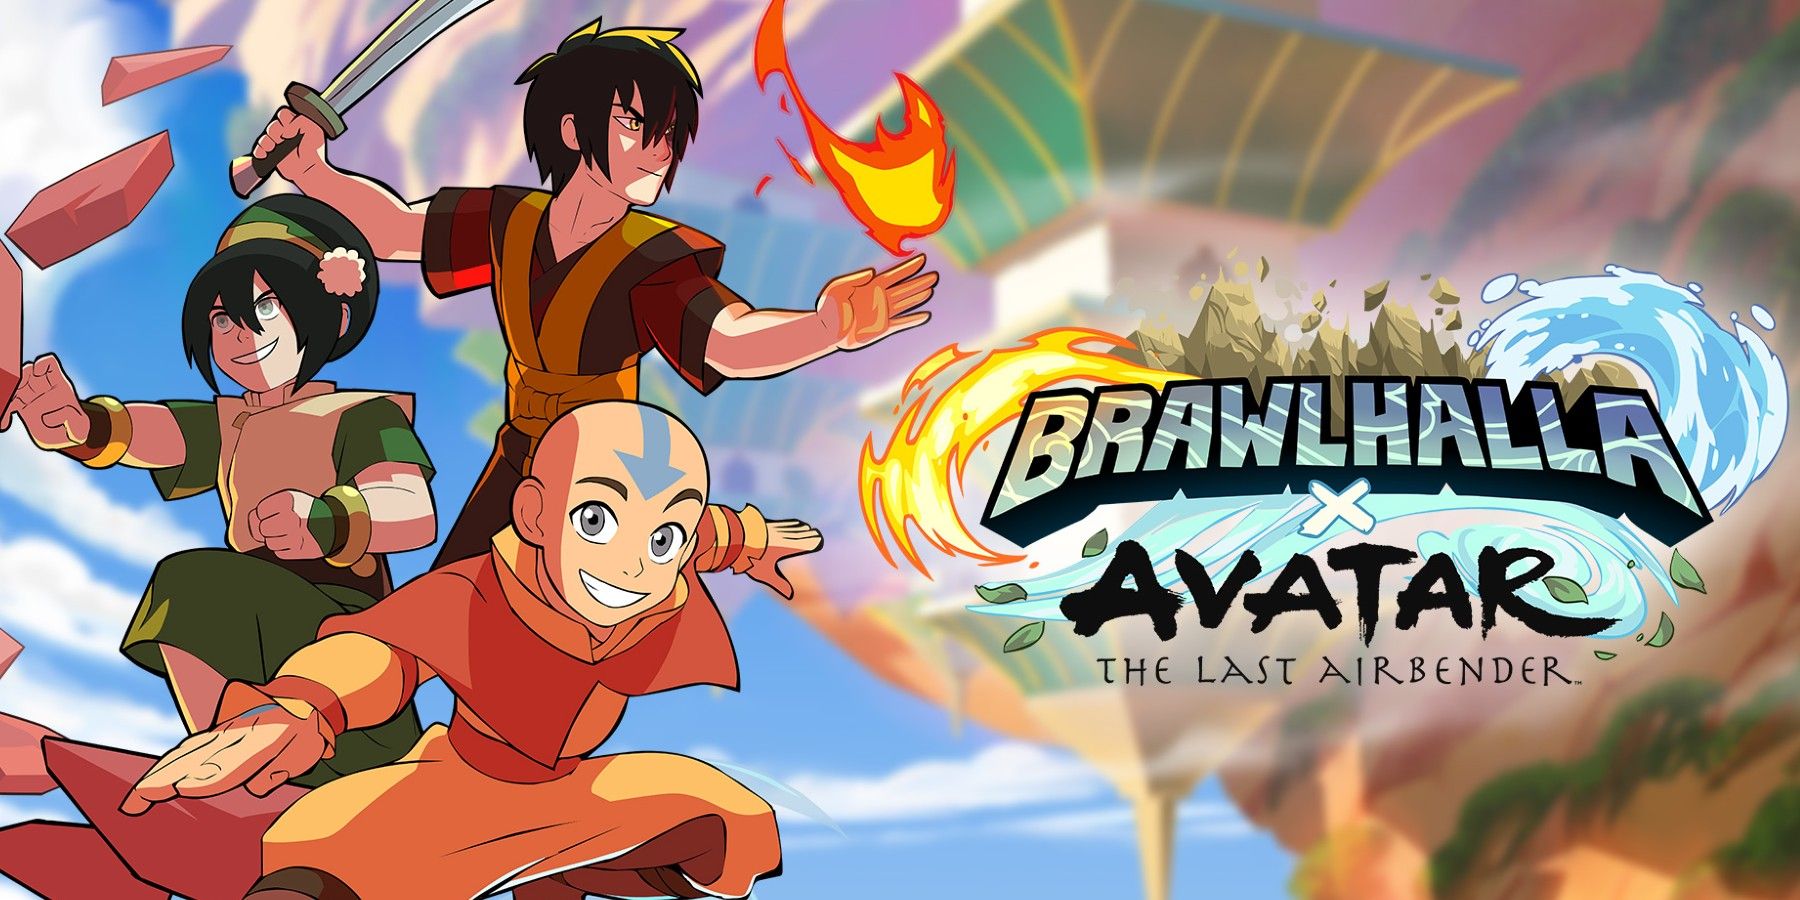 Brawlhalla Update 701 Adds Avatar The Last Airbender Characters